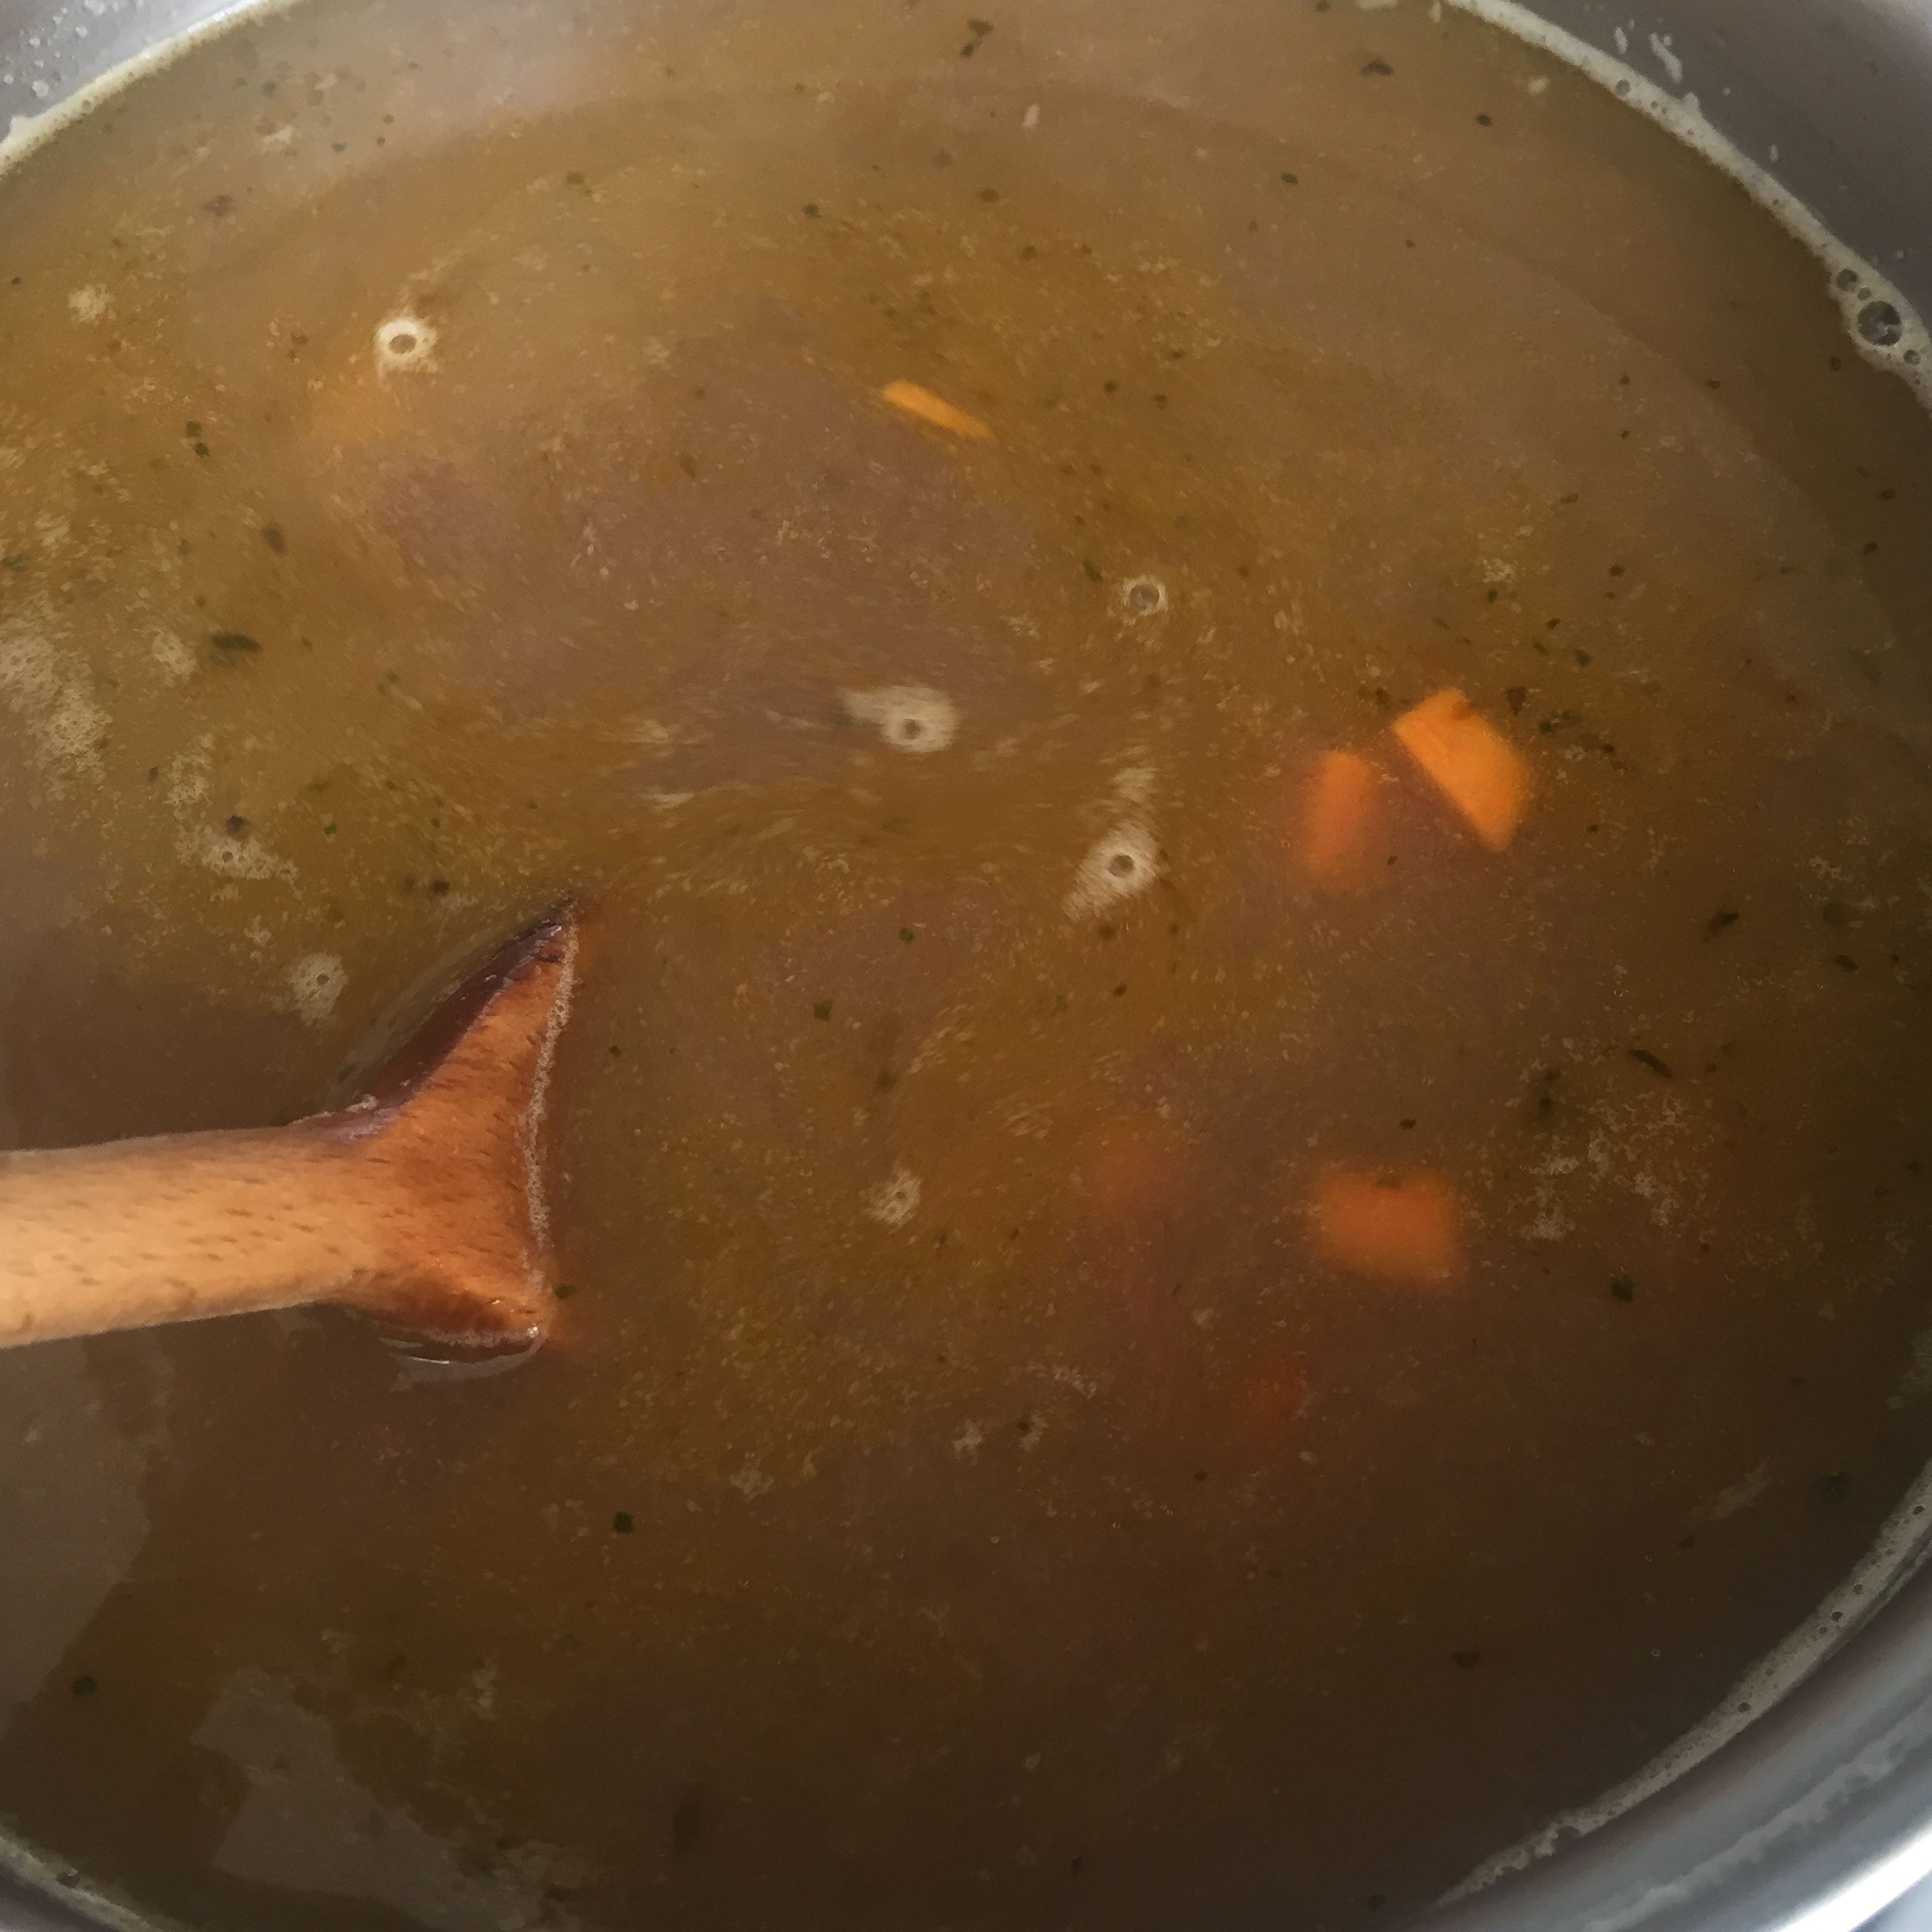 Add beef stock and water to simmering taco sauce. If a thicker sauce is desired, reduce the amount of water. Season to taste.